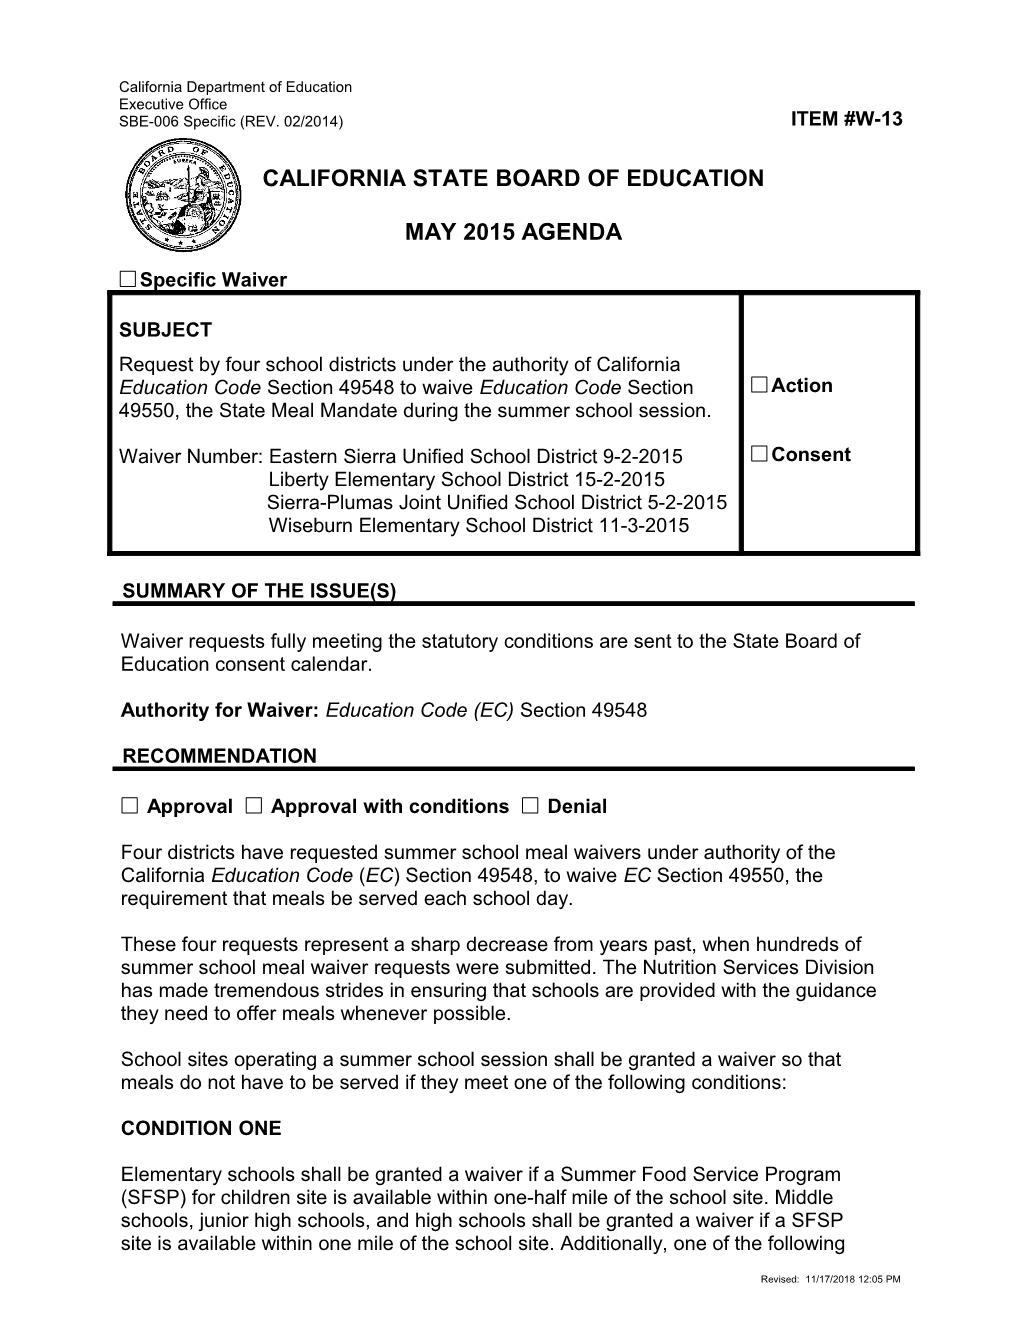 May 2015 Waiver Item W-13 - Meeting Agendas (CA State Board of Education)